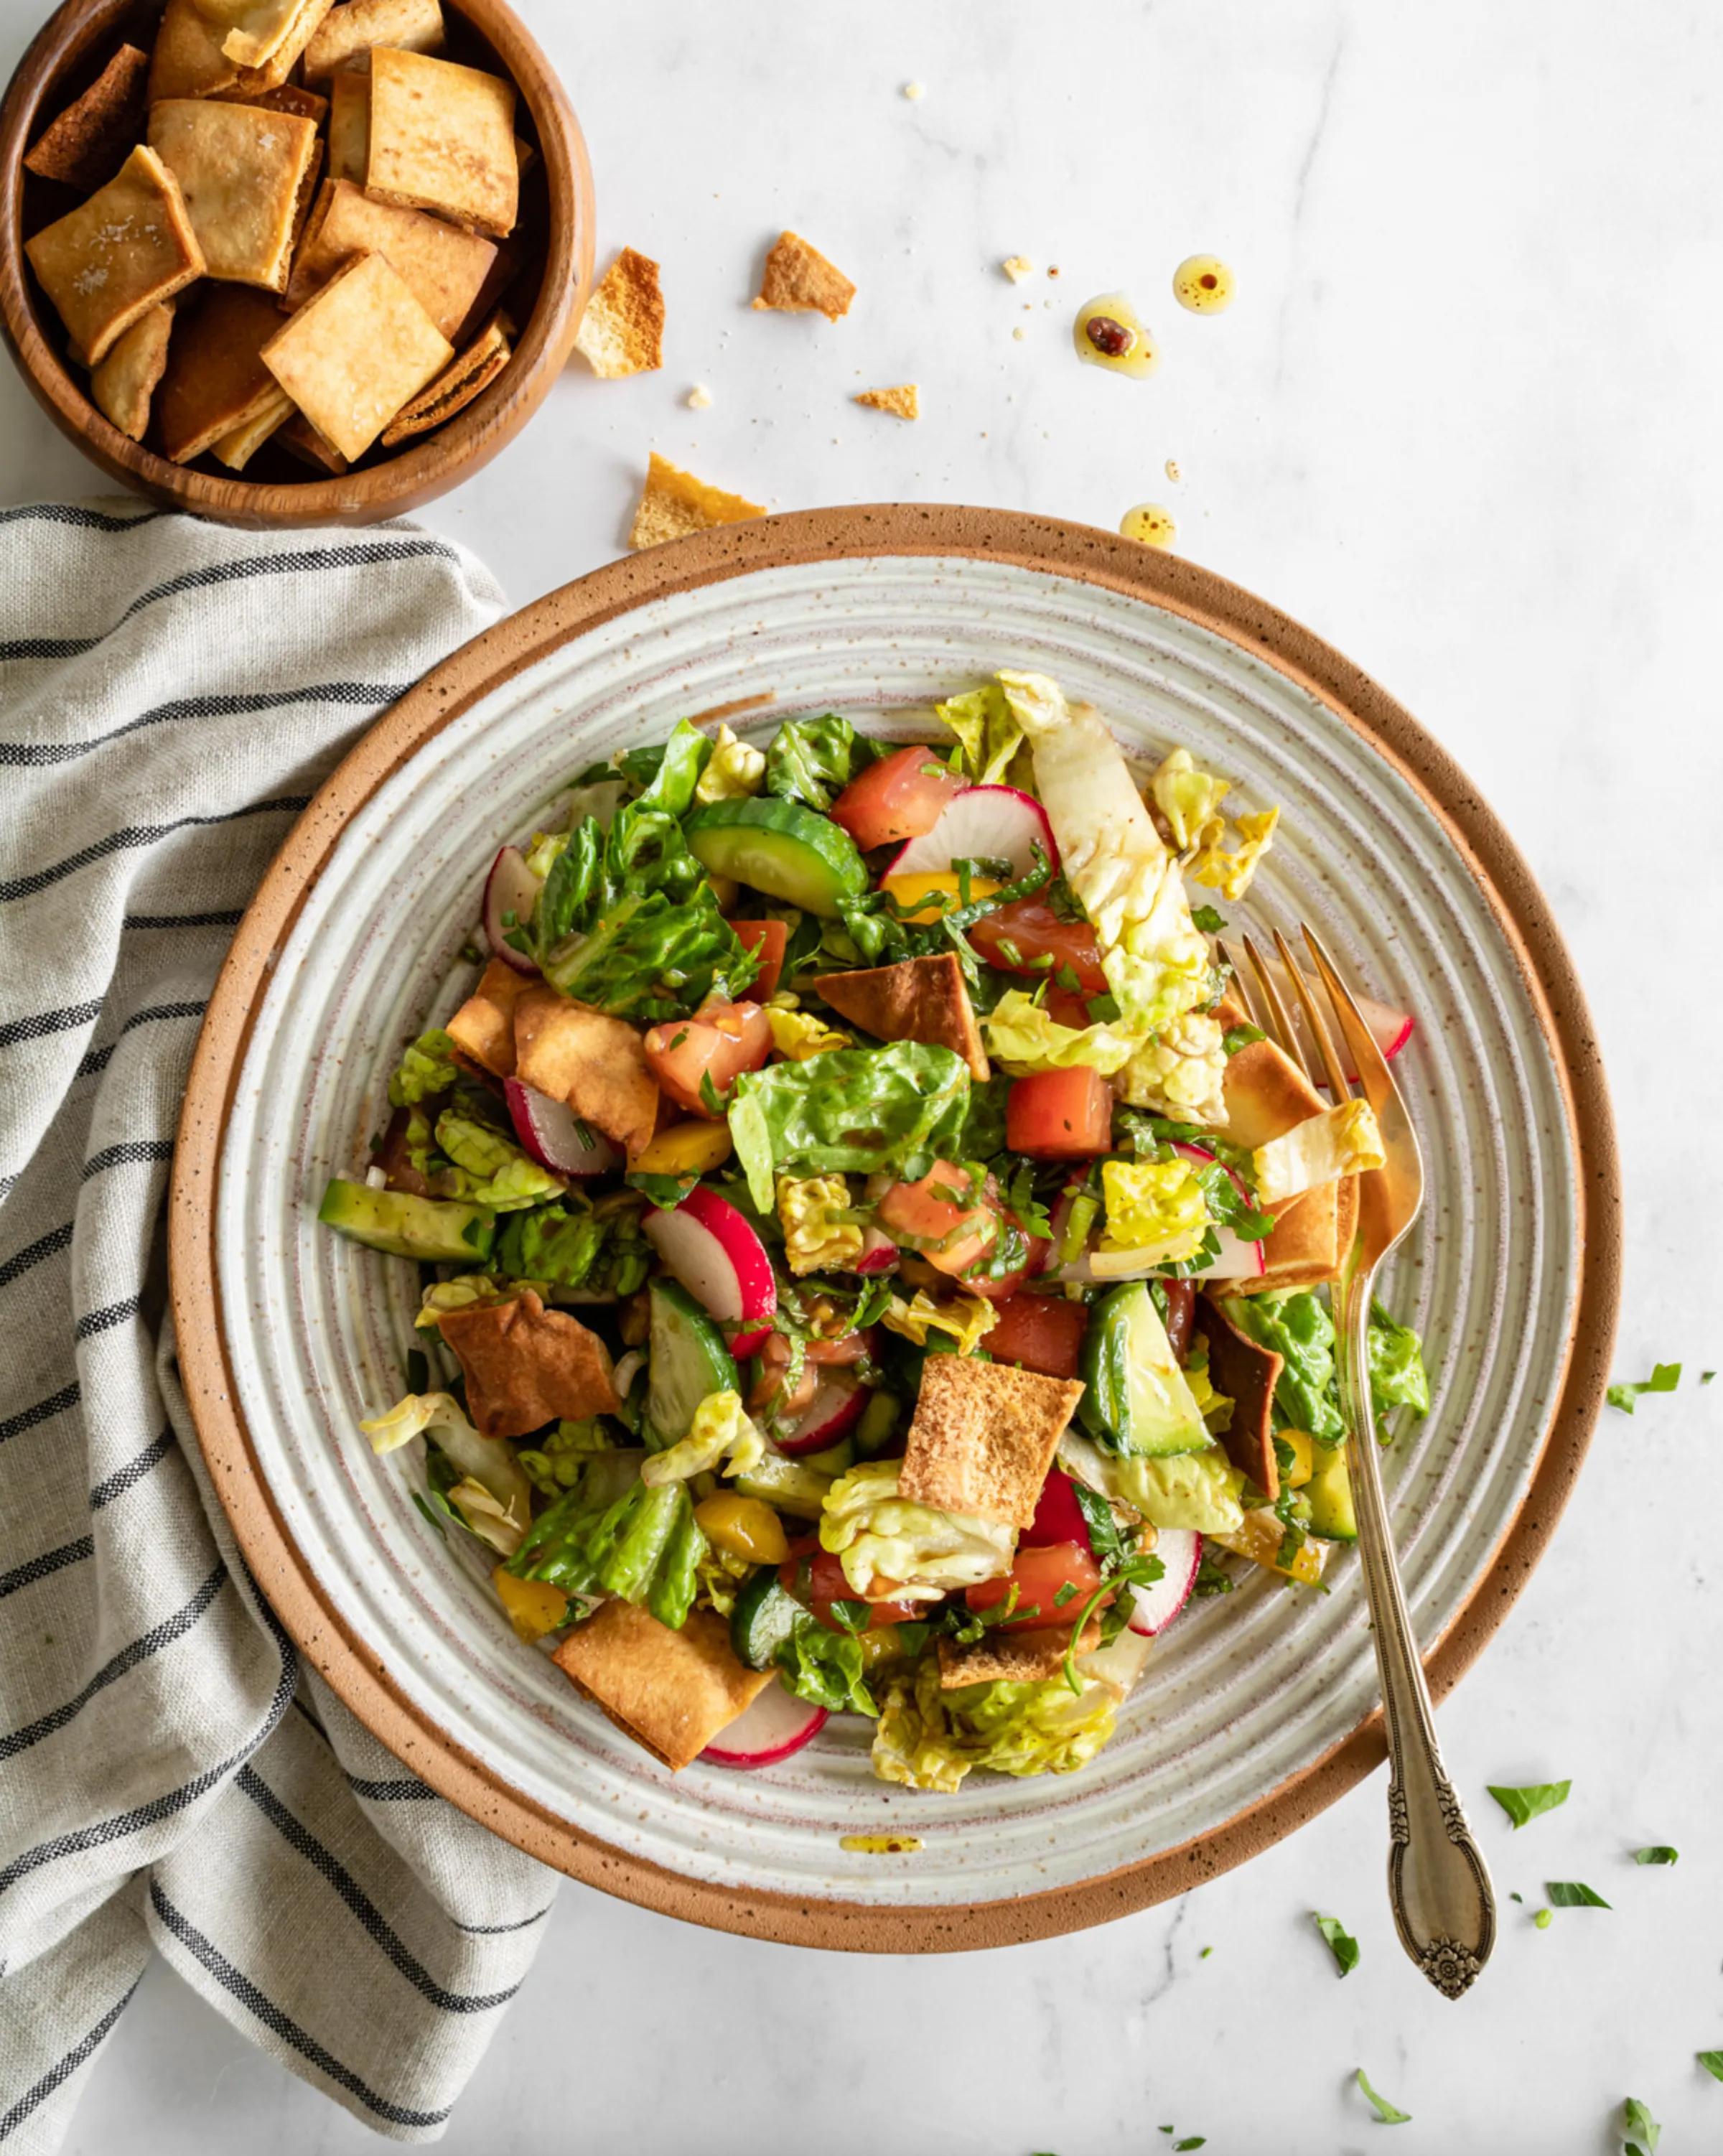 While this recipe for fattoush salad uses romaine, tomatoes, cucumbers, radishes, bell peppers, and herbs, you can really use whatever you have on hand. Open a bag of pita chips instead of baking your own for a lightning-fast lunch. (via <a href="https://www.brit.co/fattoush-salad/"><strong>Brit + Co.</strong></a>)